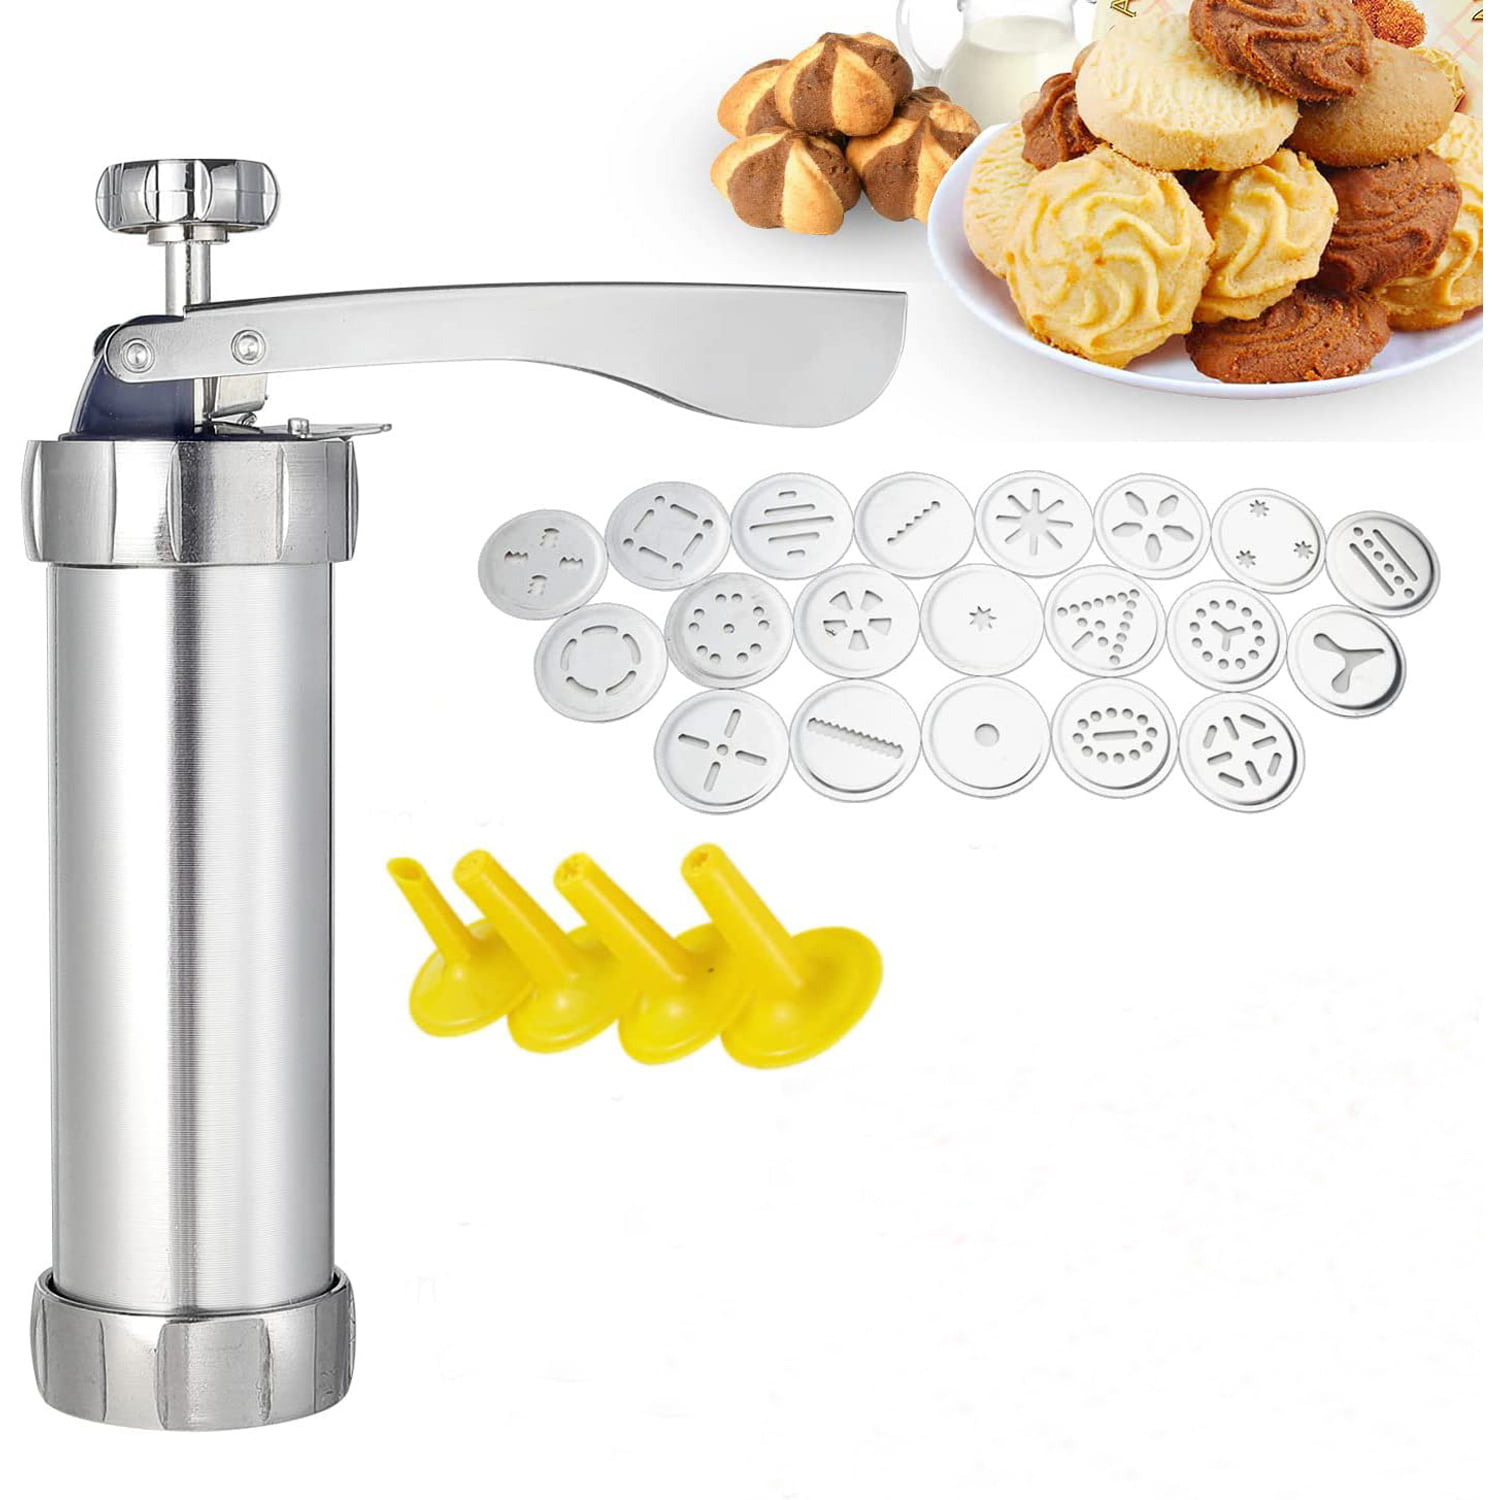 New 20 Pcs Stainless Steel Baking Cookie Stamp Press Pump Machine Biscuit Maker 